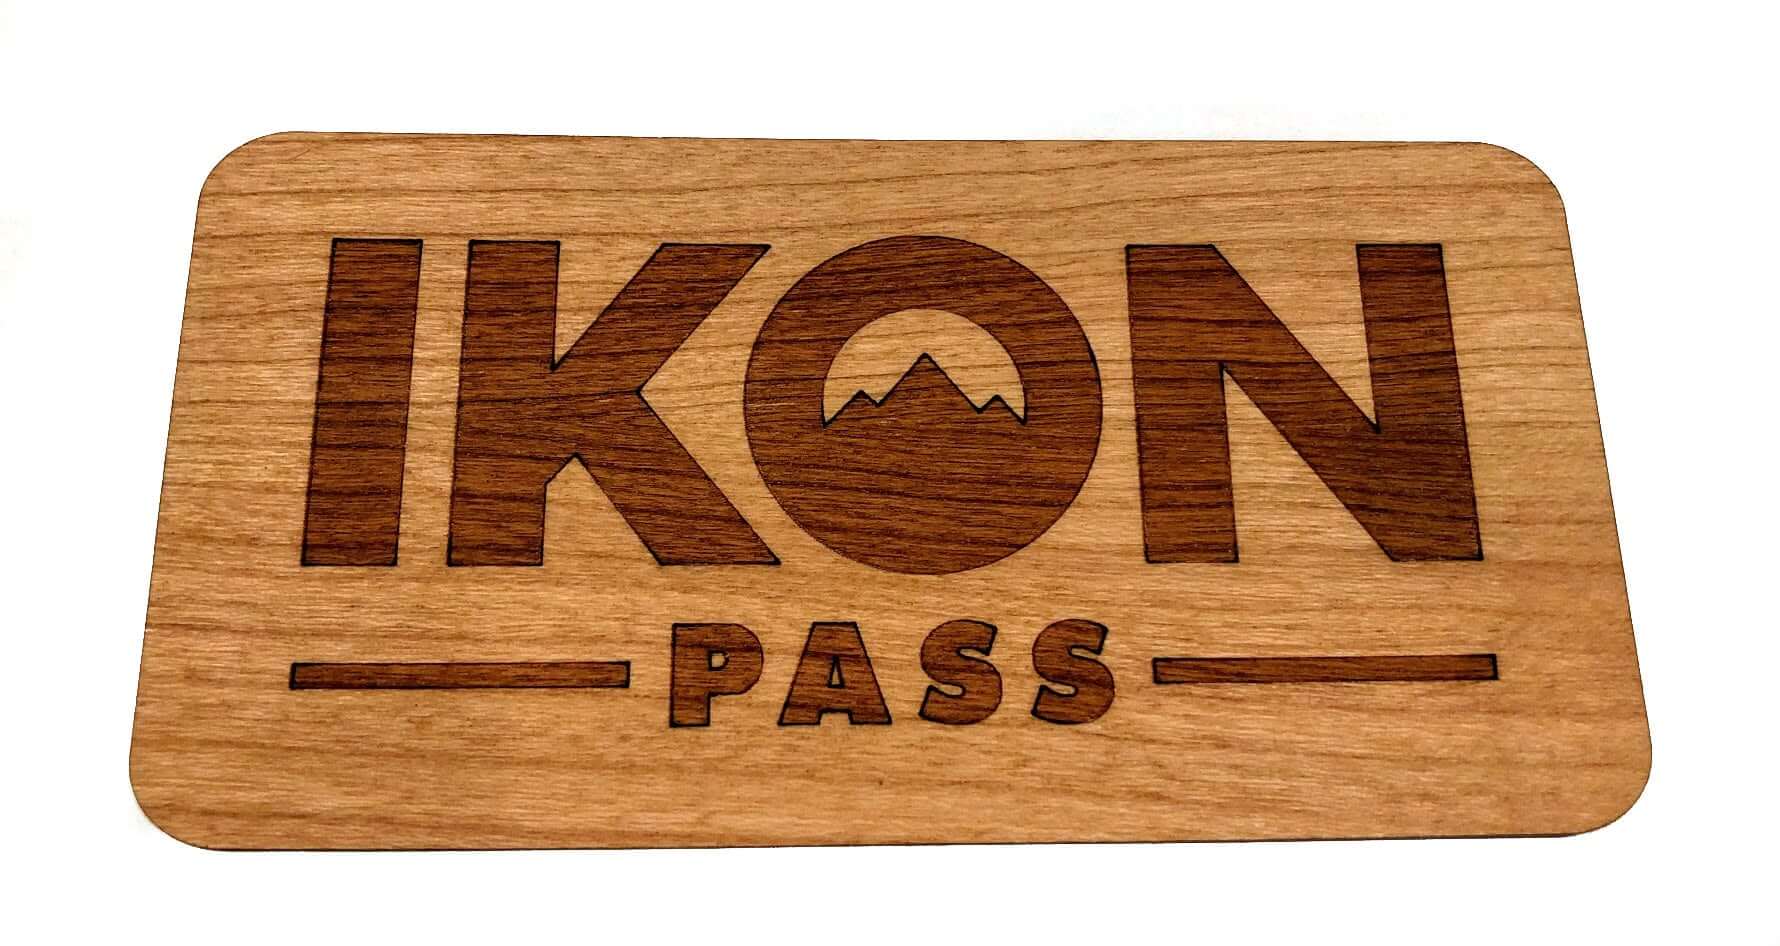 WUDN Wholesale Wooden Promotional Products: The (mostly) Complete